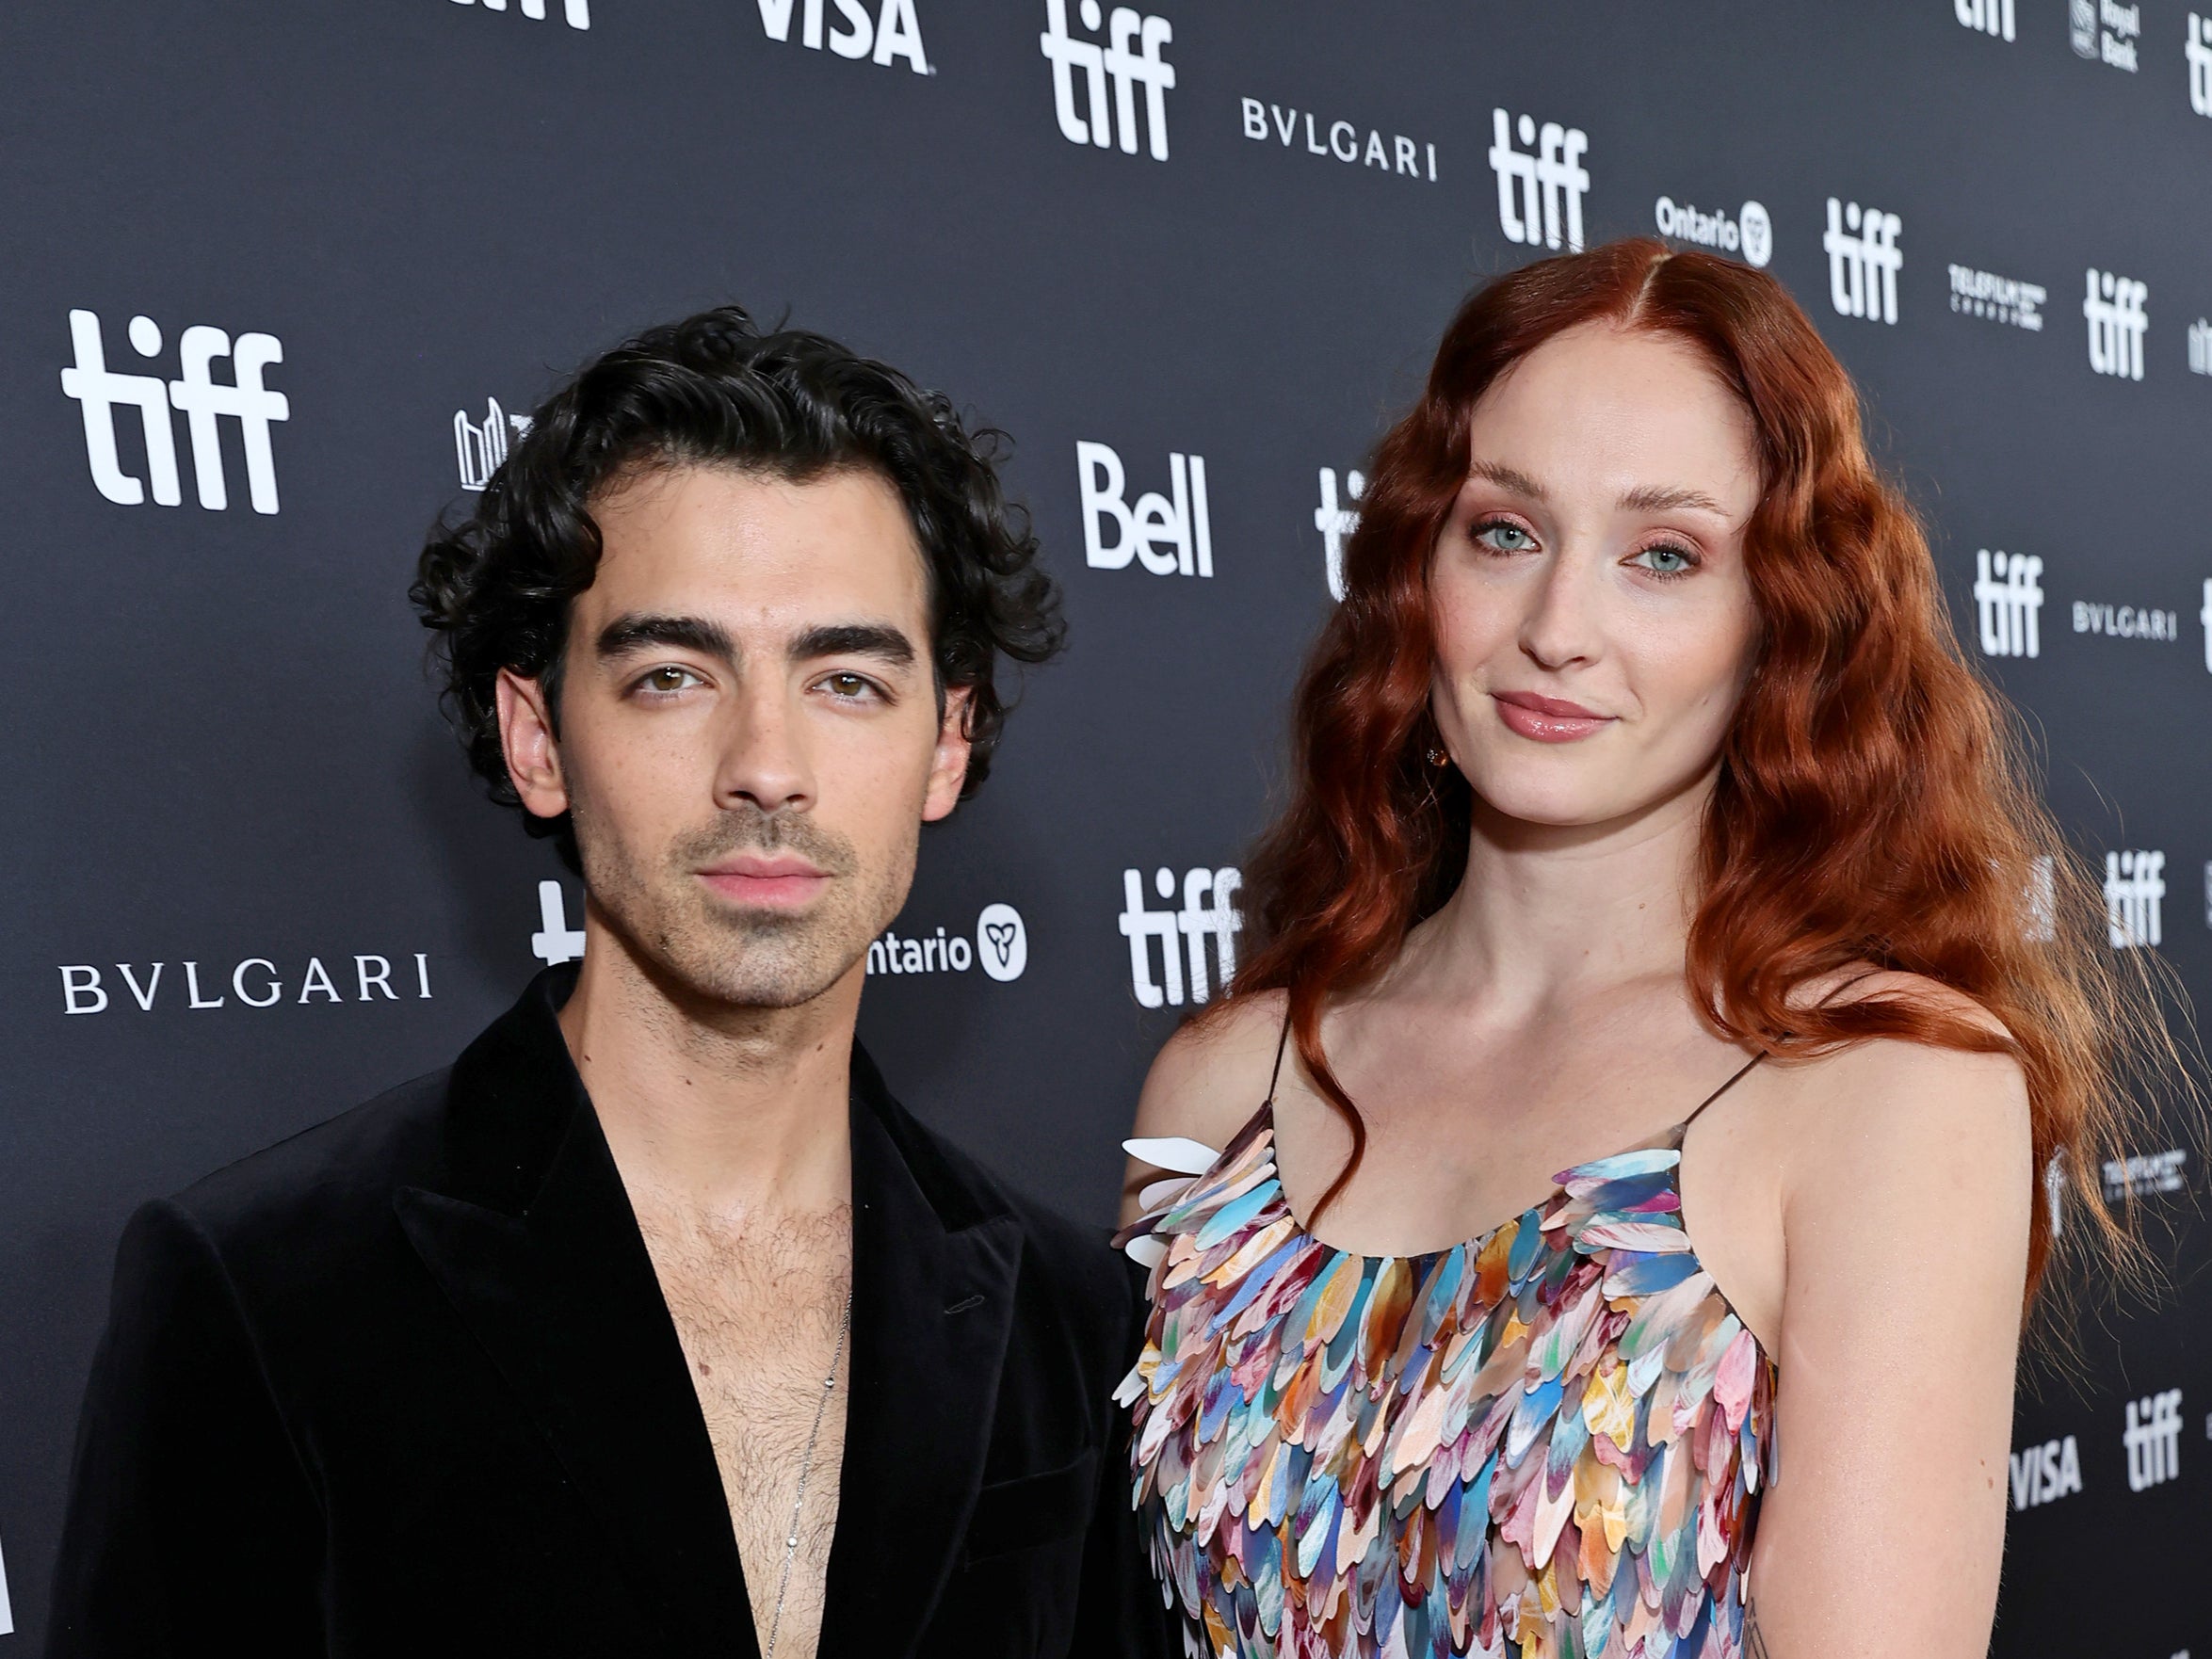 Sophie Turner Sues Joe Jonas: Everything to Know About Their Marriage and  Divorce